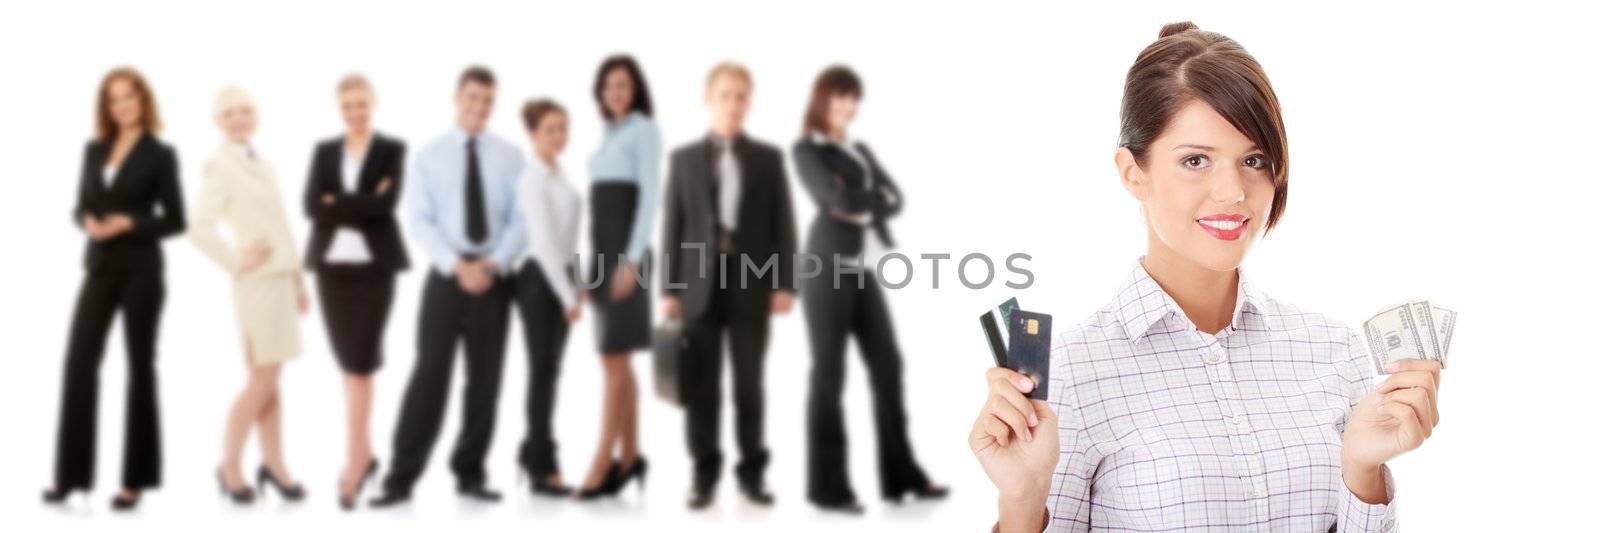 Woman with a credit card and cash on her hand